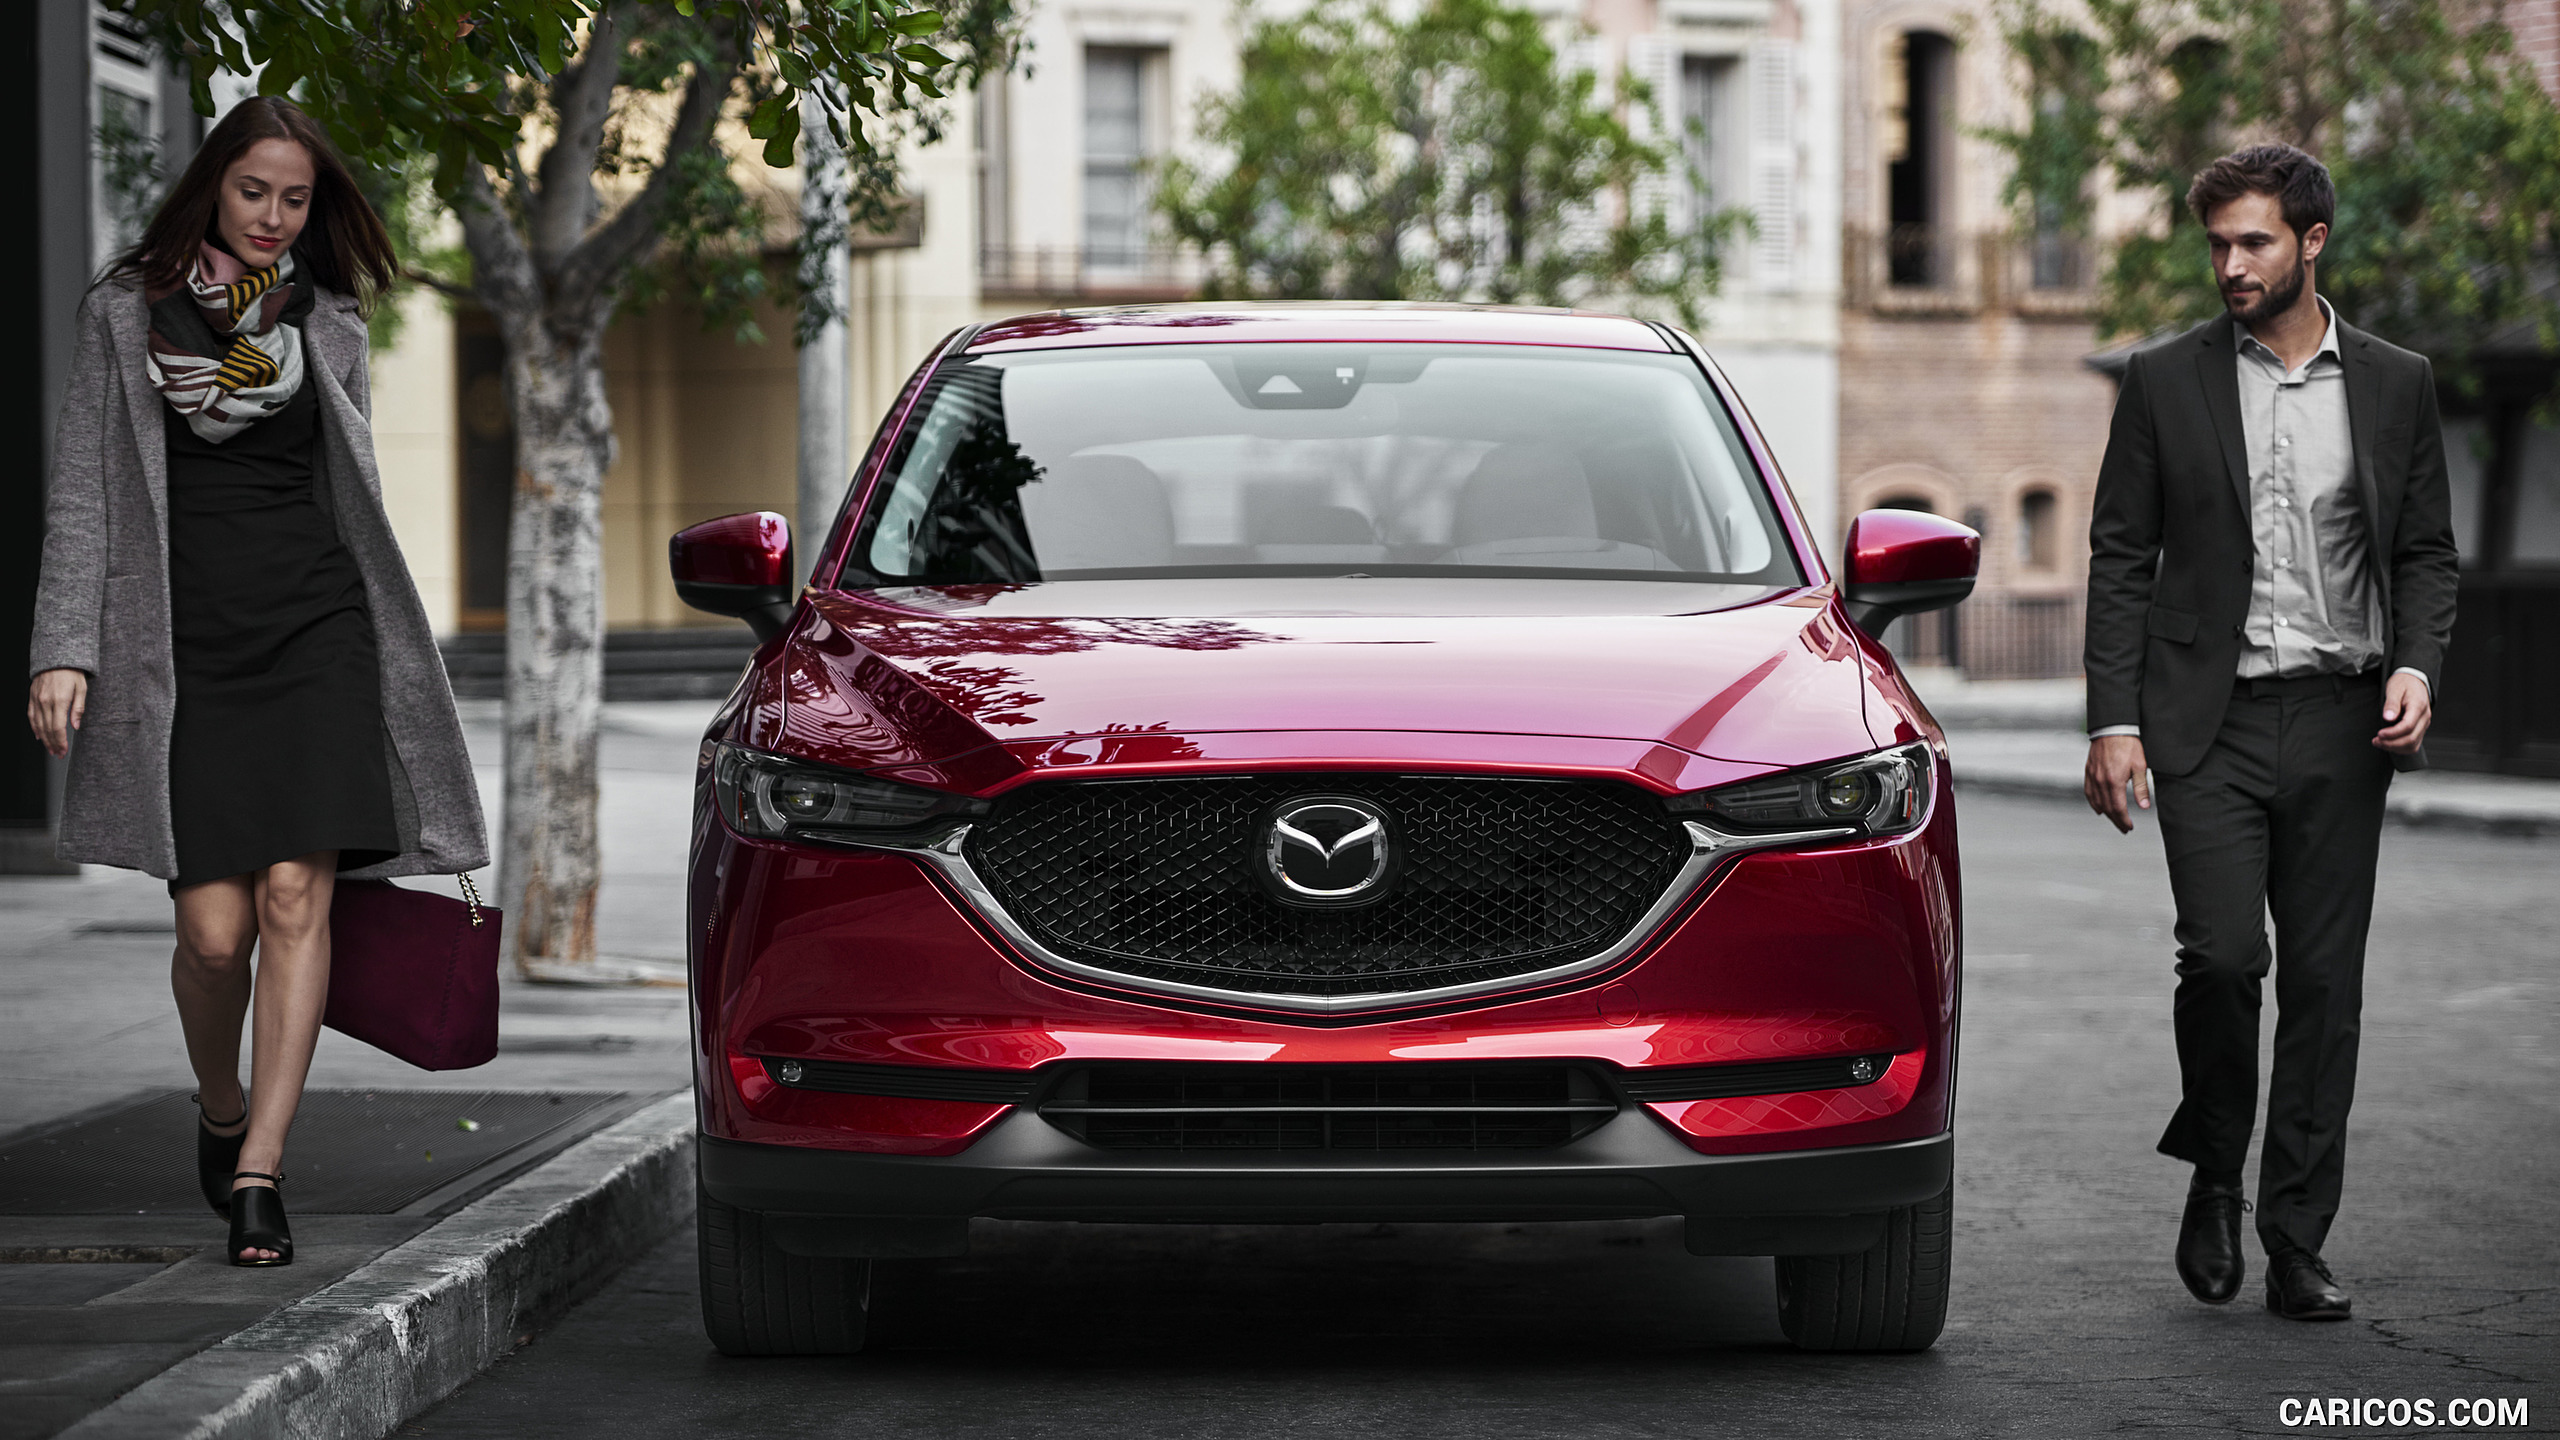 2017 Mazda CX-5 - Front, #16 of 42